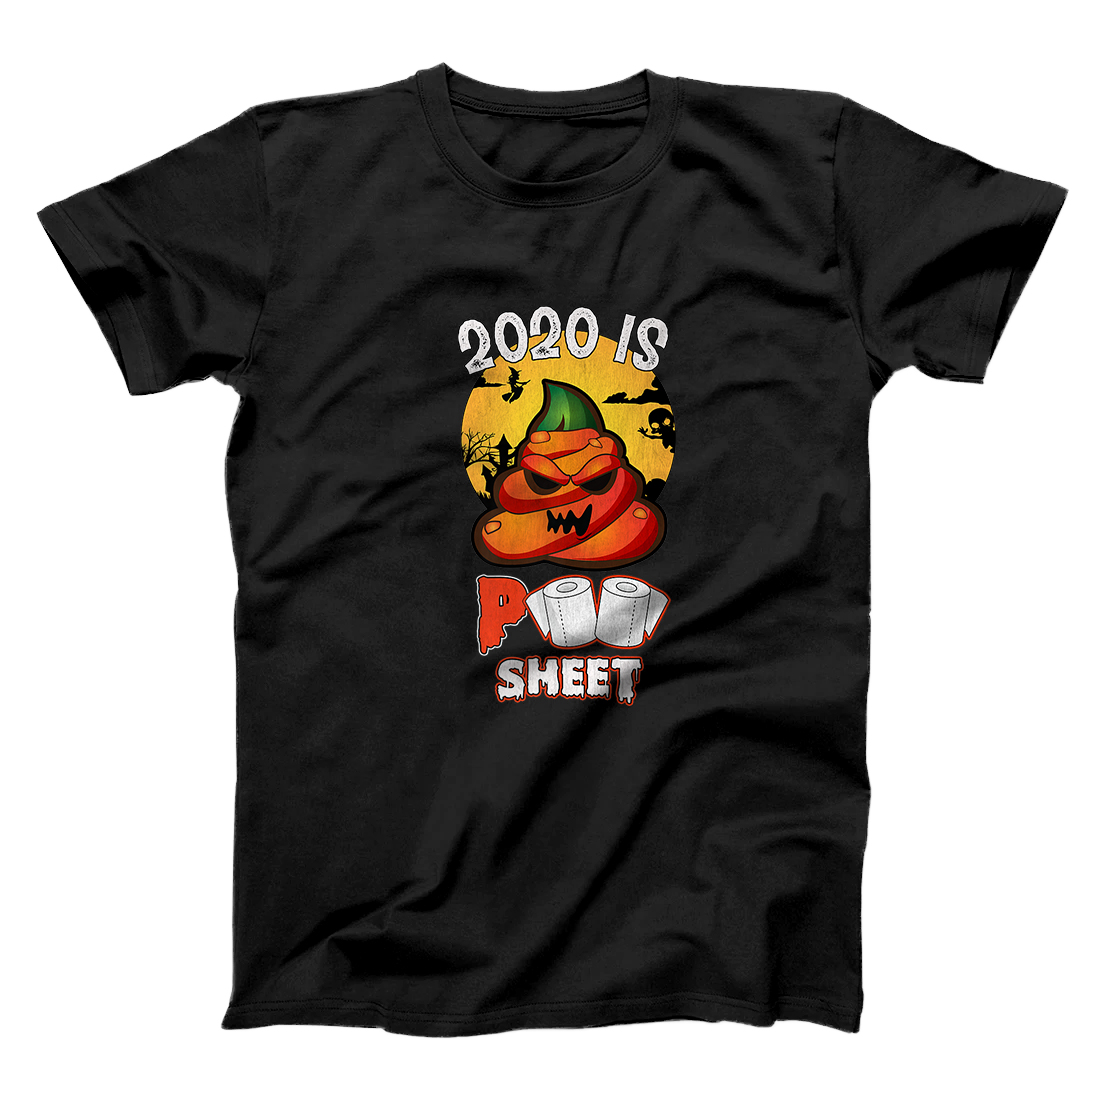 Personalized Funny Halloween Poop Emoji Ghost 2020 Is Some Boo Sheet Premium T-Shirt